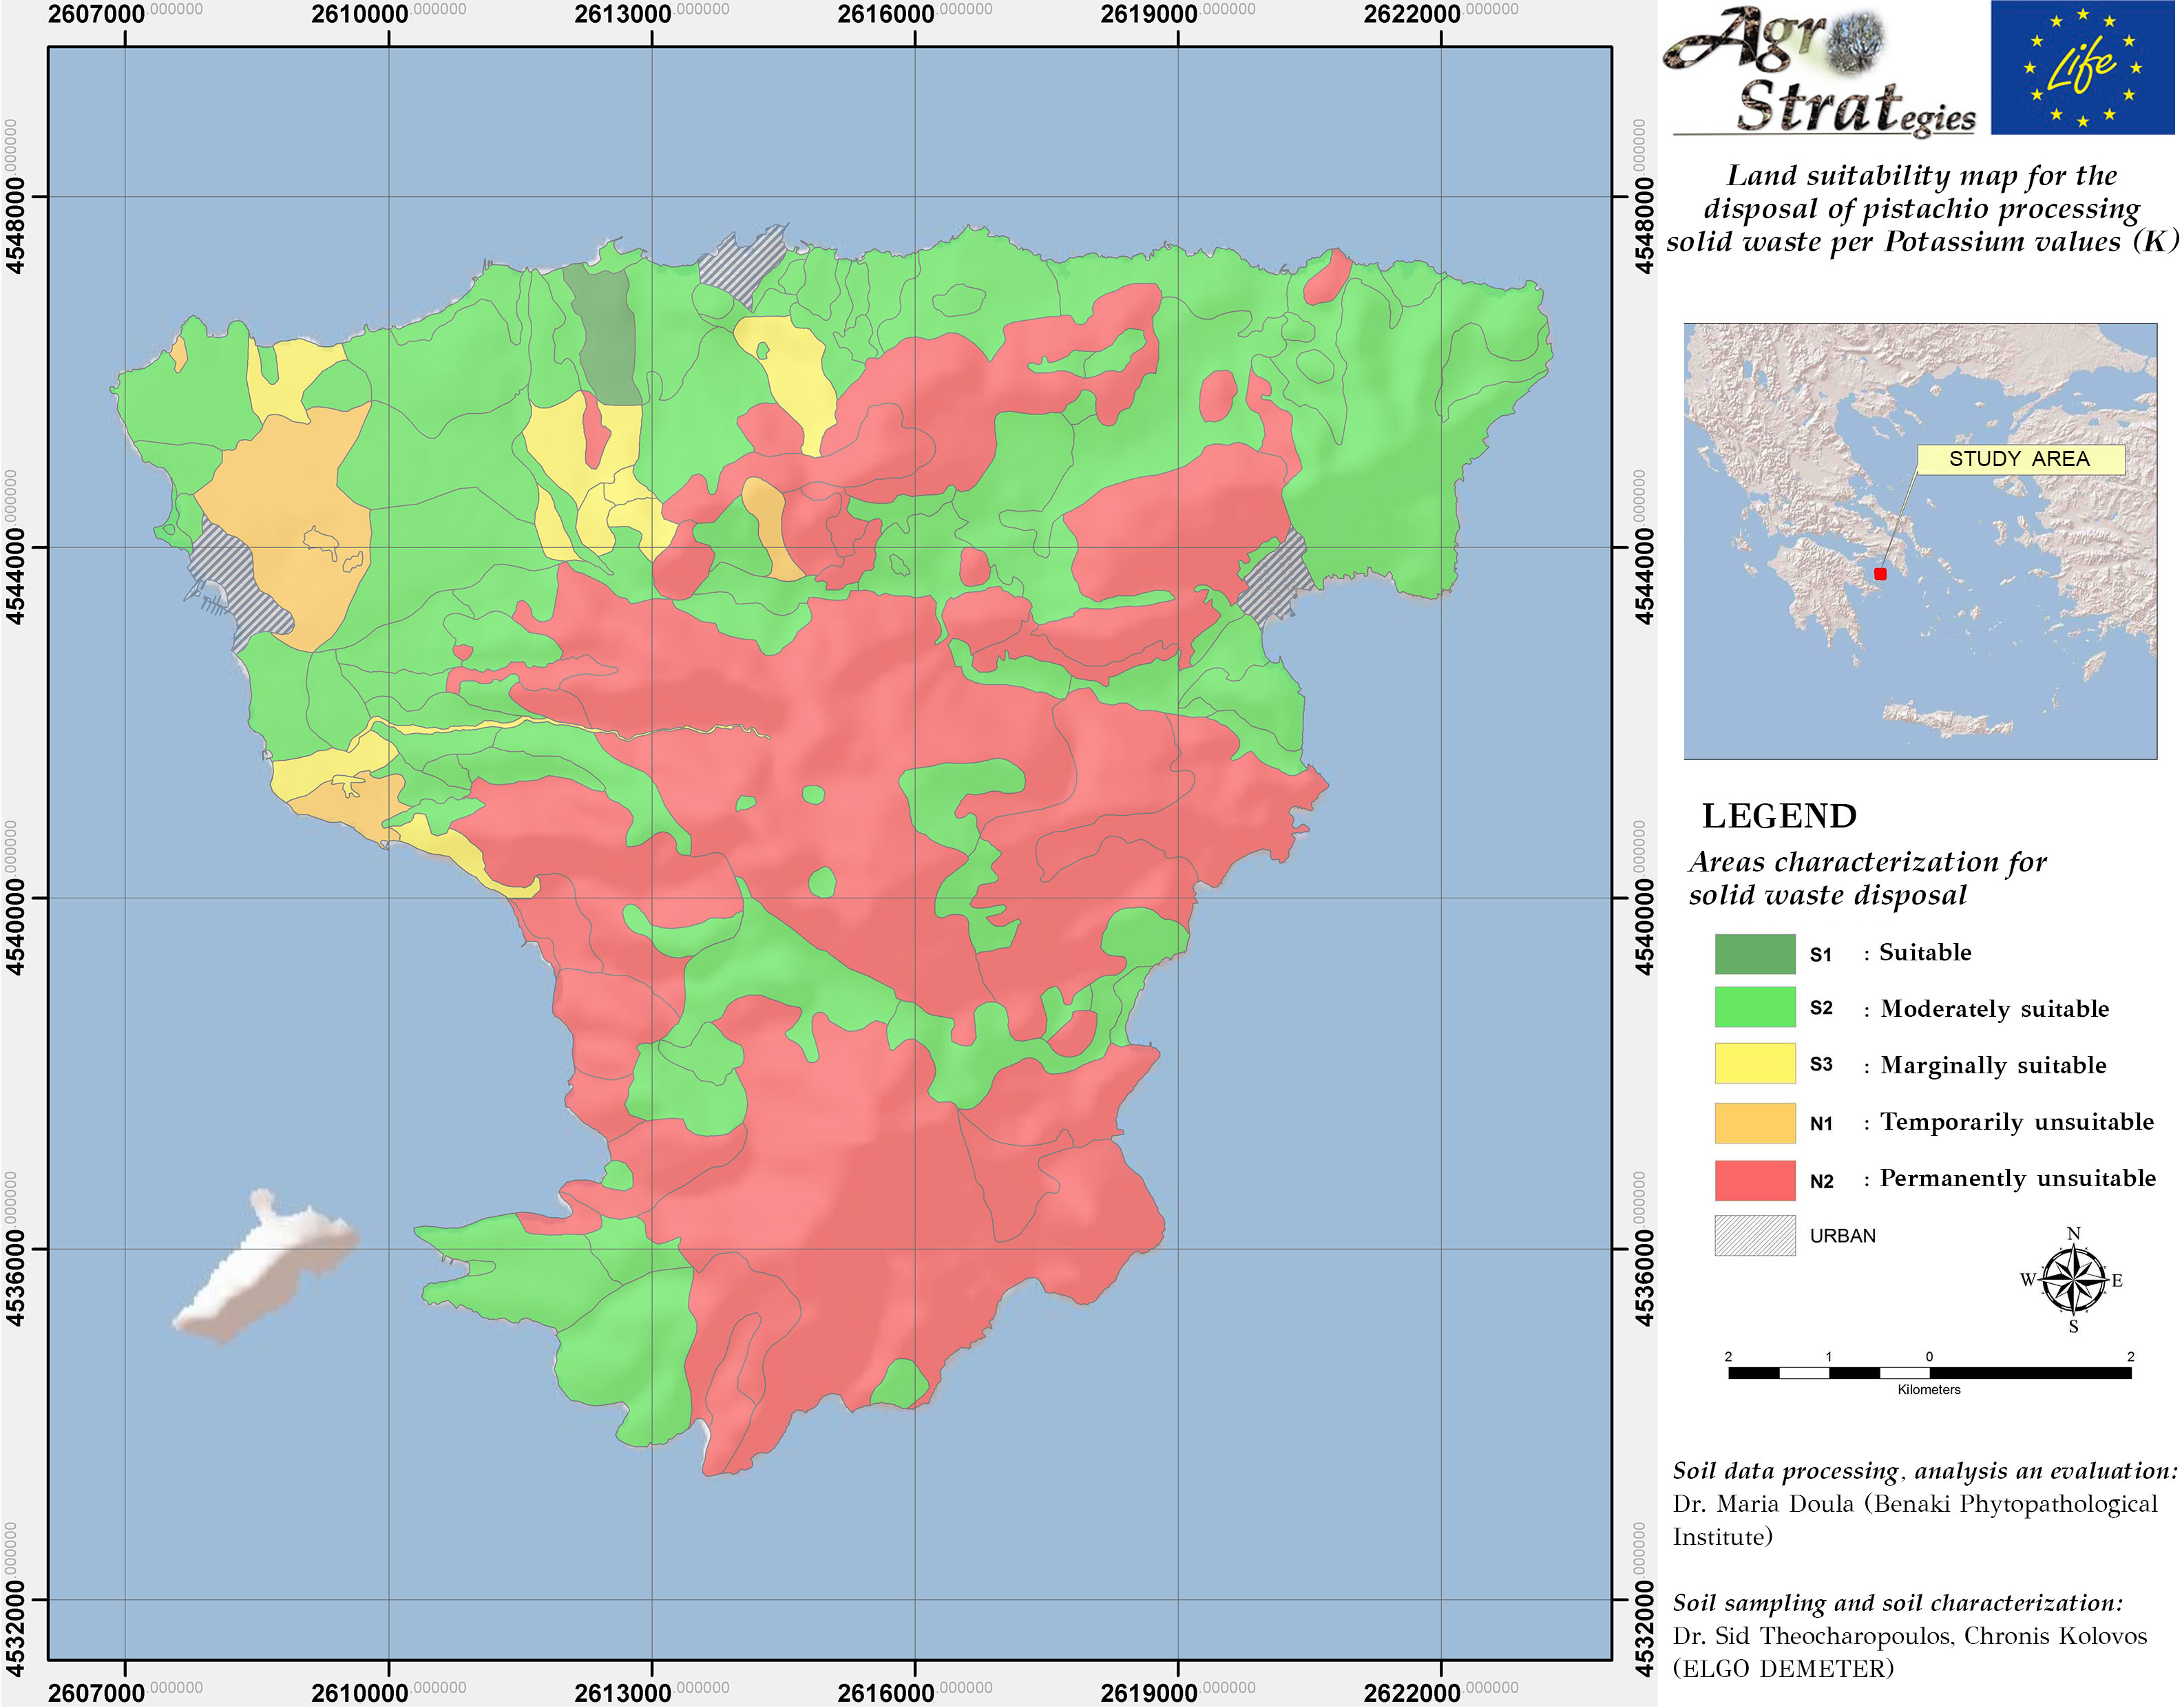 Dr. Maria Doula Land Suitability Map of Aegina island, Greece, for the distribution of solid pistachio waste as per soil exchangeable Potassium content (LIFE-AgroStrat)